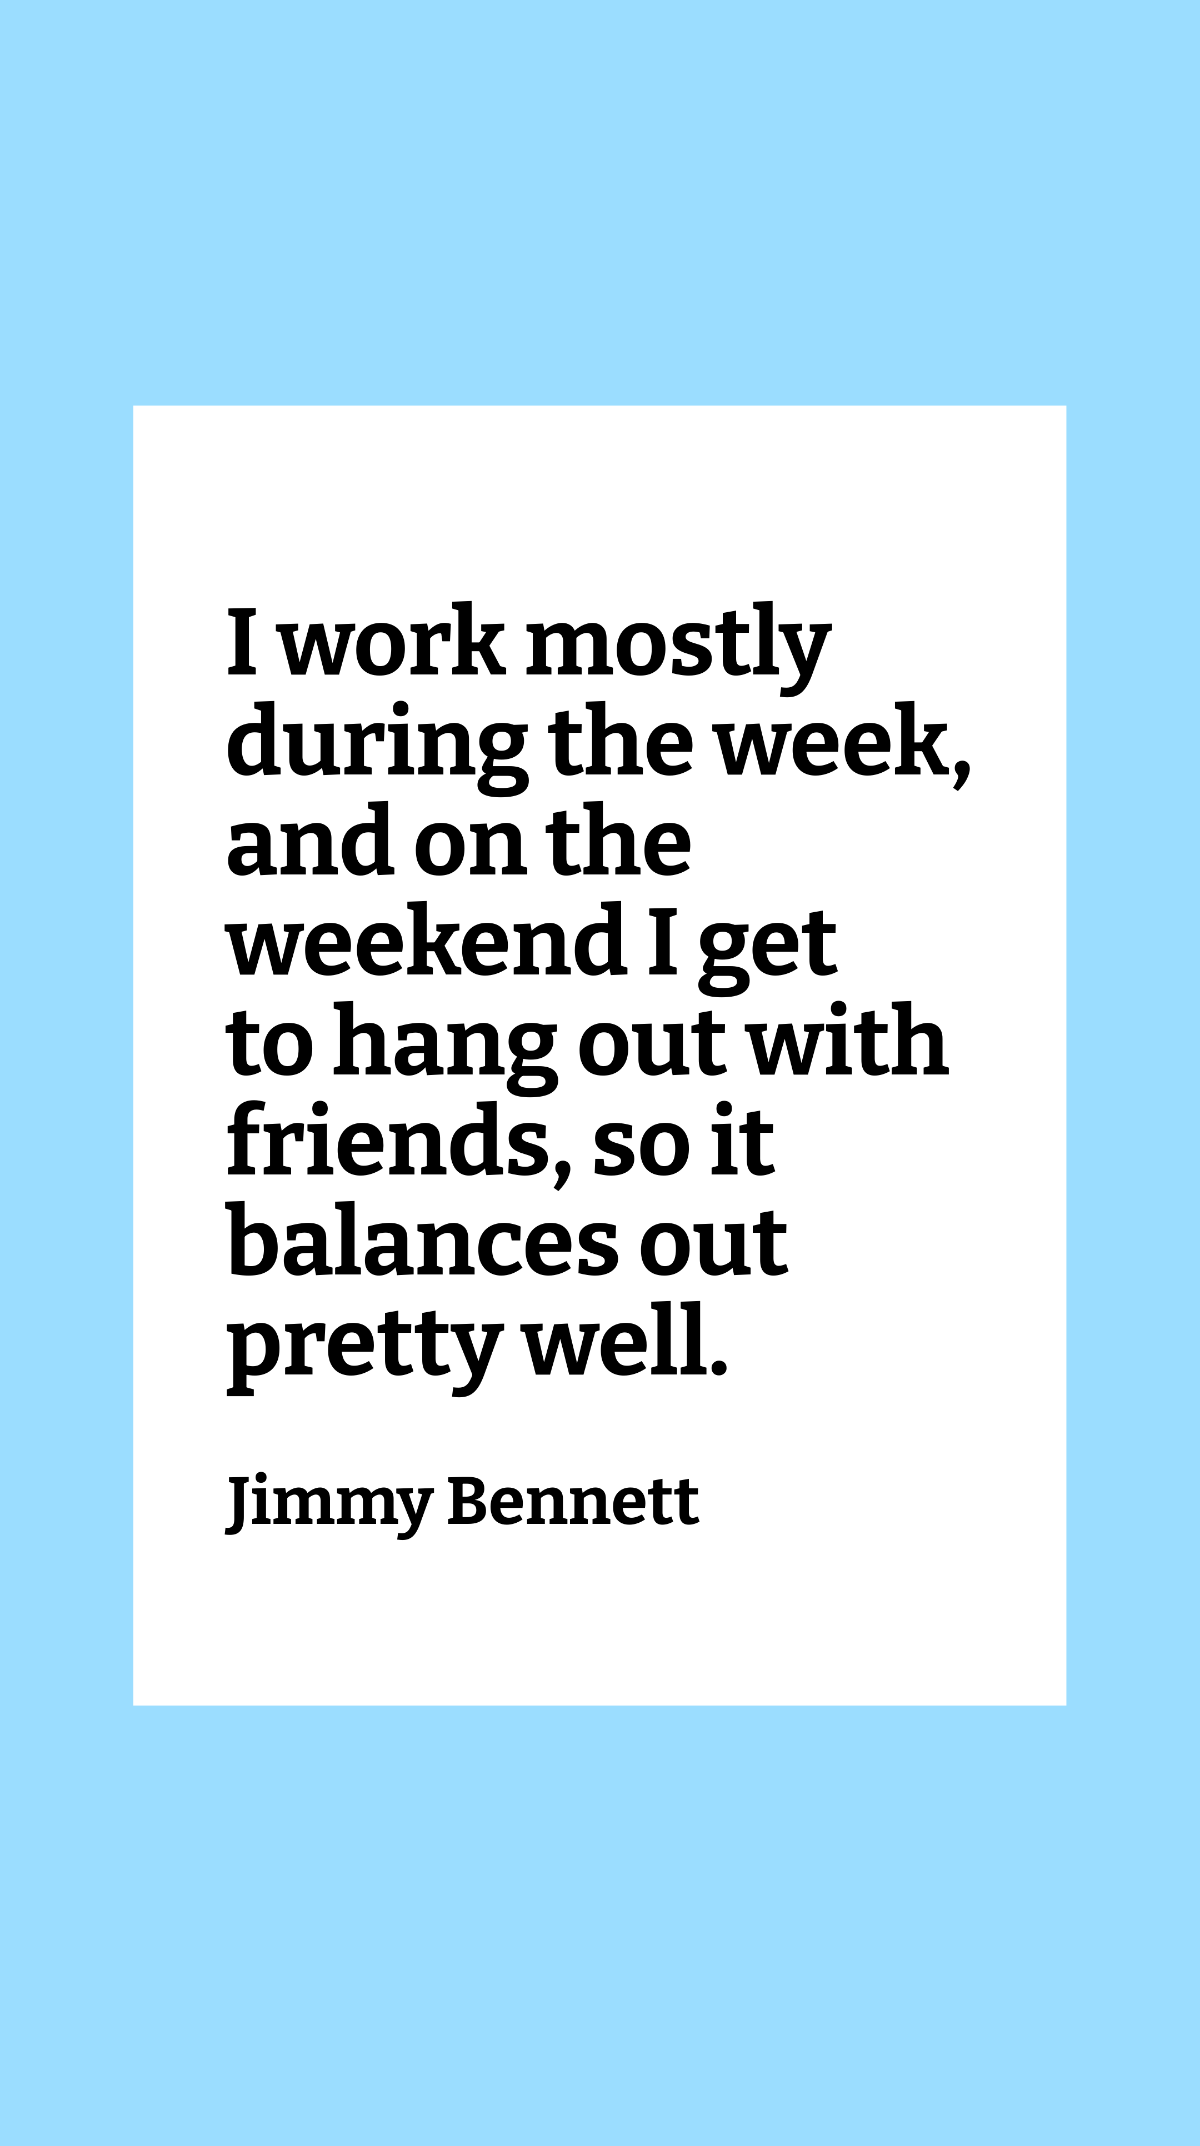 Free Jimmy Bennett - I work mostly during the week, and on the weekend I get to hang out with friends, so it balances out pretty well. Template